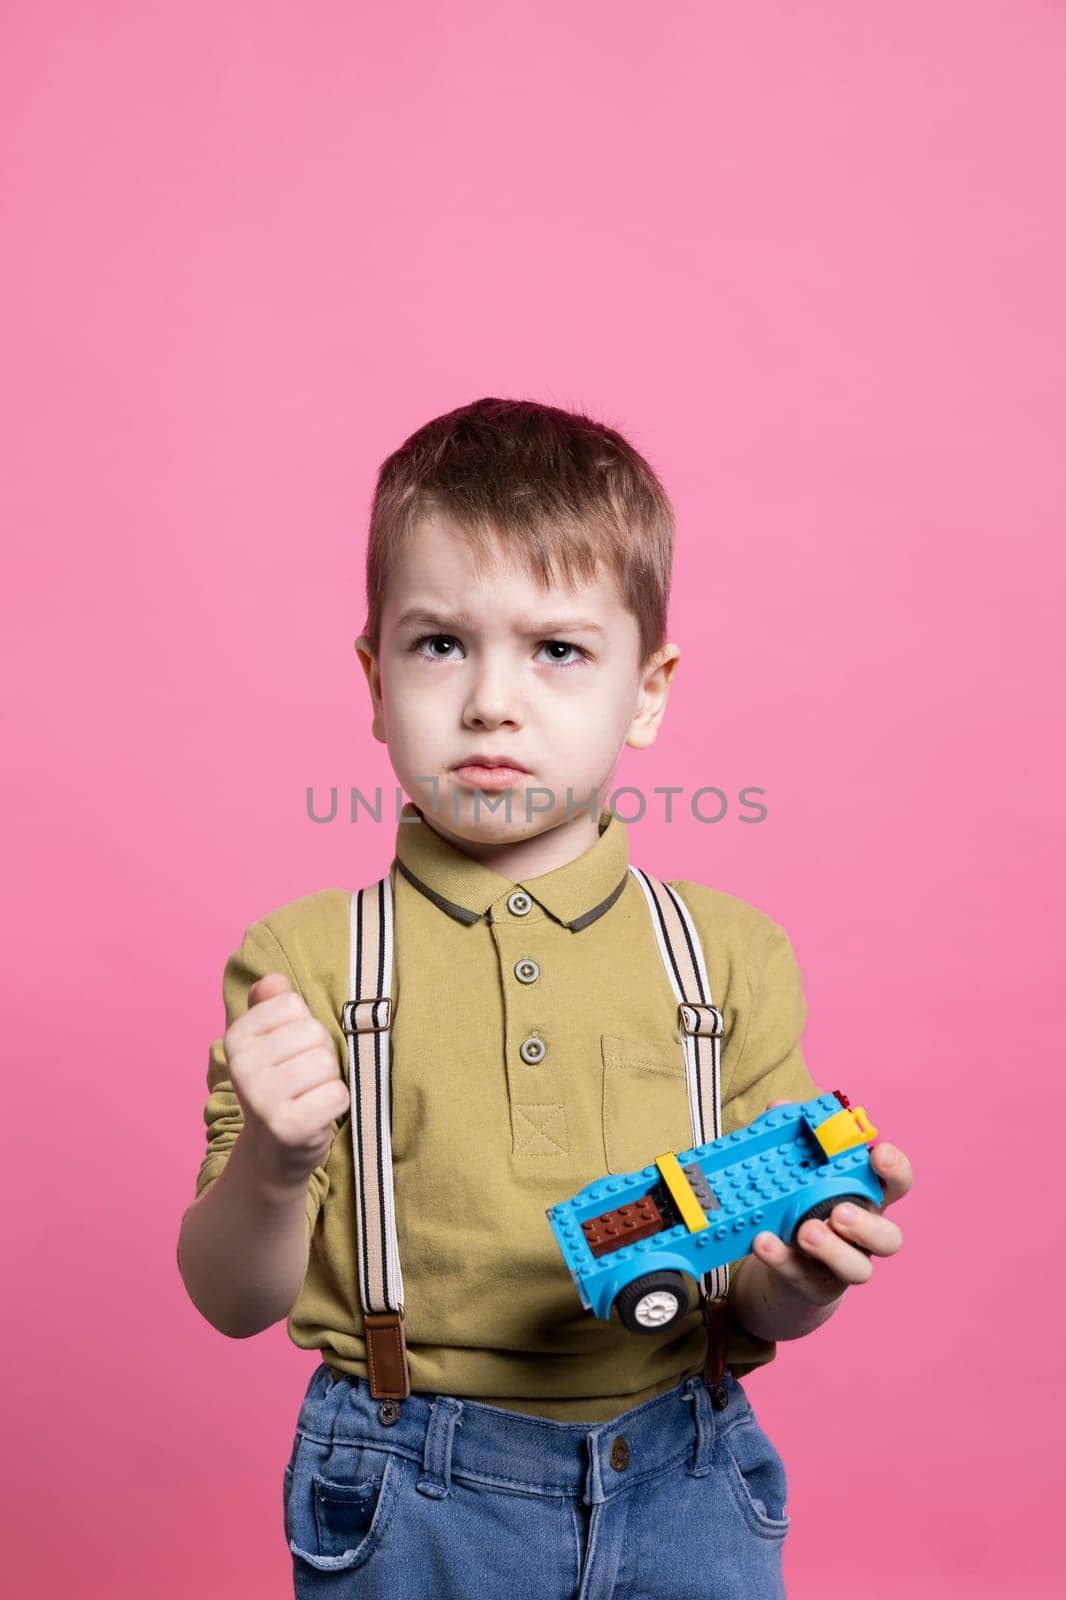 Displeased irritated small boy feeling sad while he plays with a toy car, almost crying in front of the camera. Little child feeling angry and upset holding a plastic blue automobile.